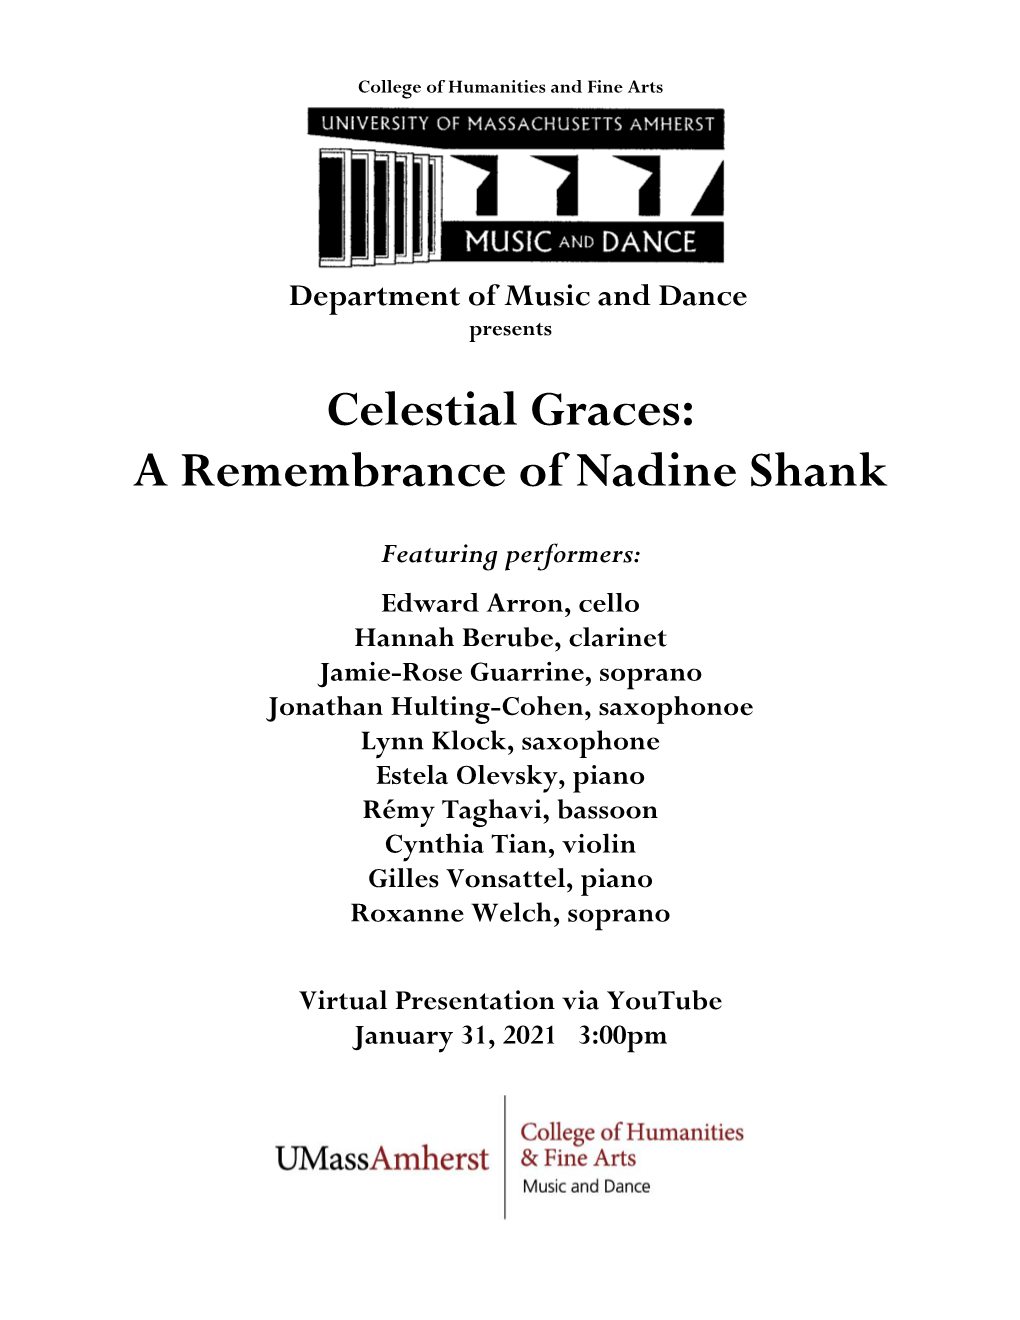 A Remembrance of Nadine Shank